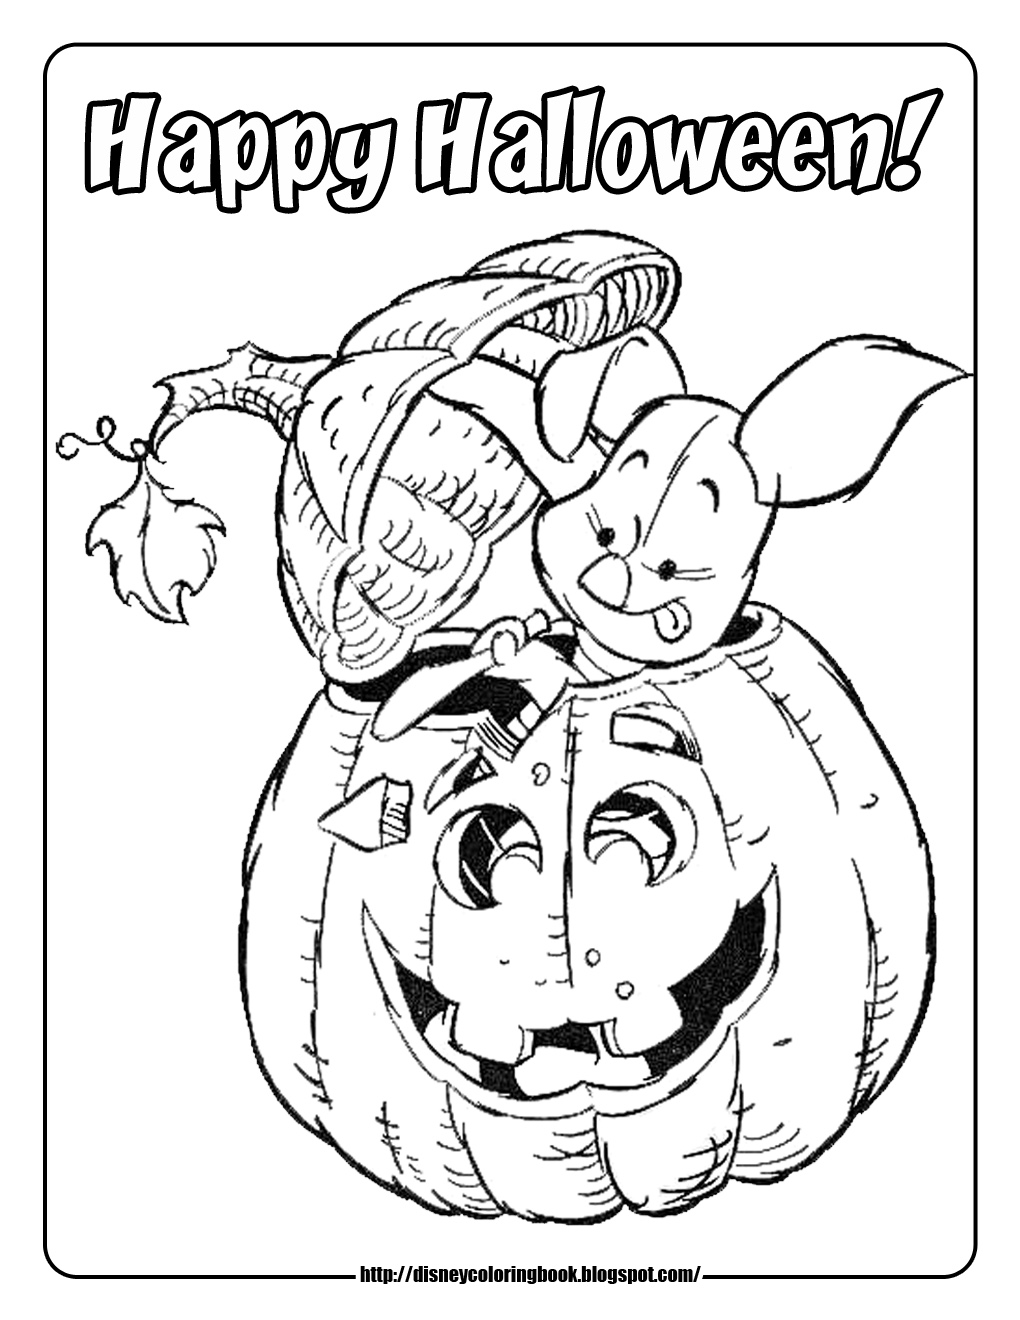 Pooh and Friends Halloween 2: Free Disney Halloween Coloring Pages